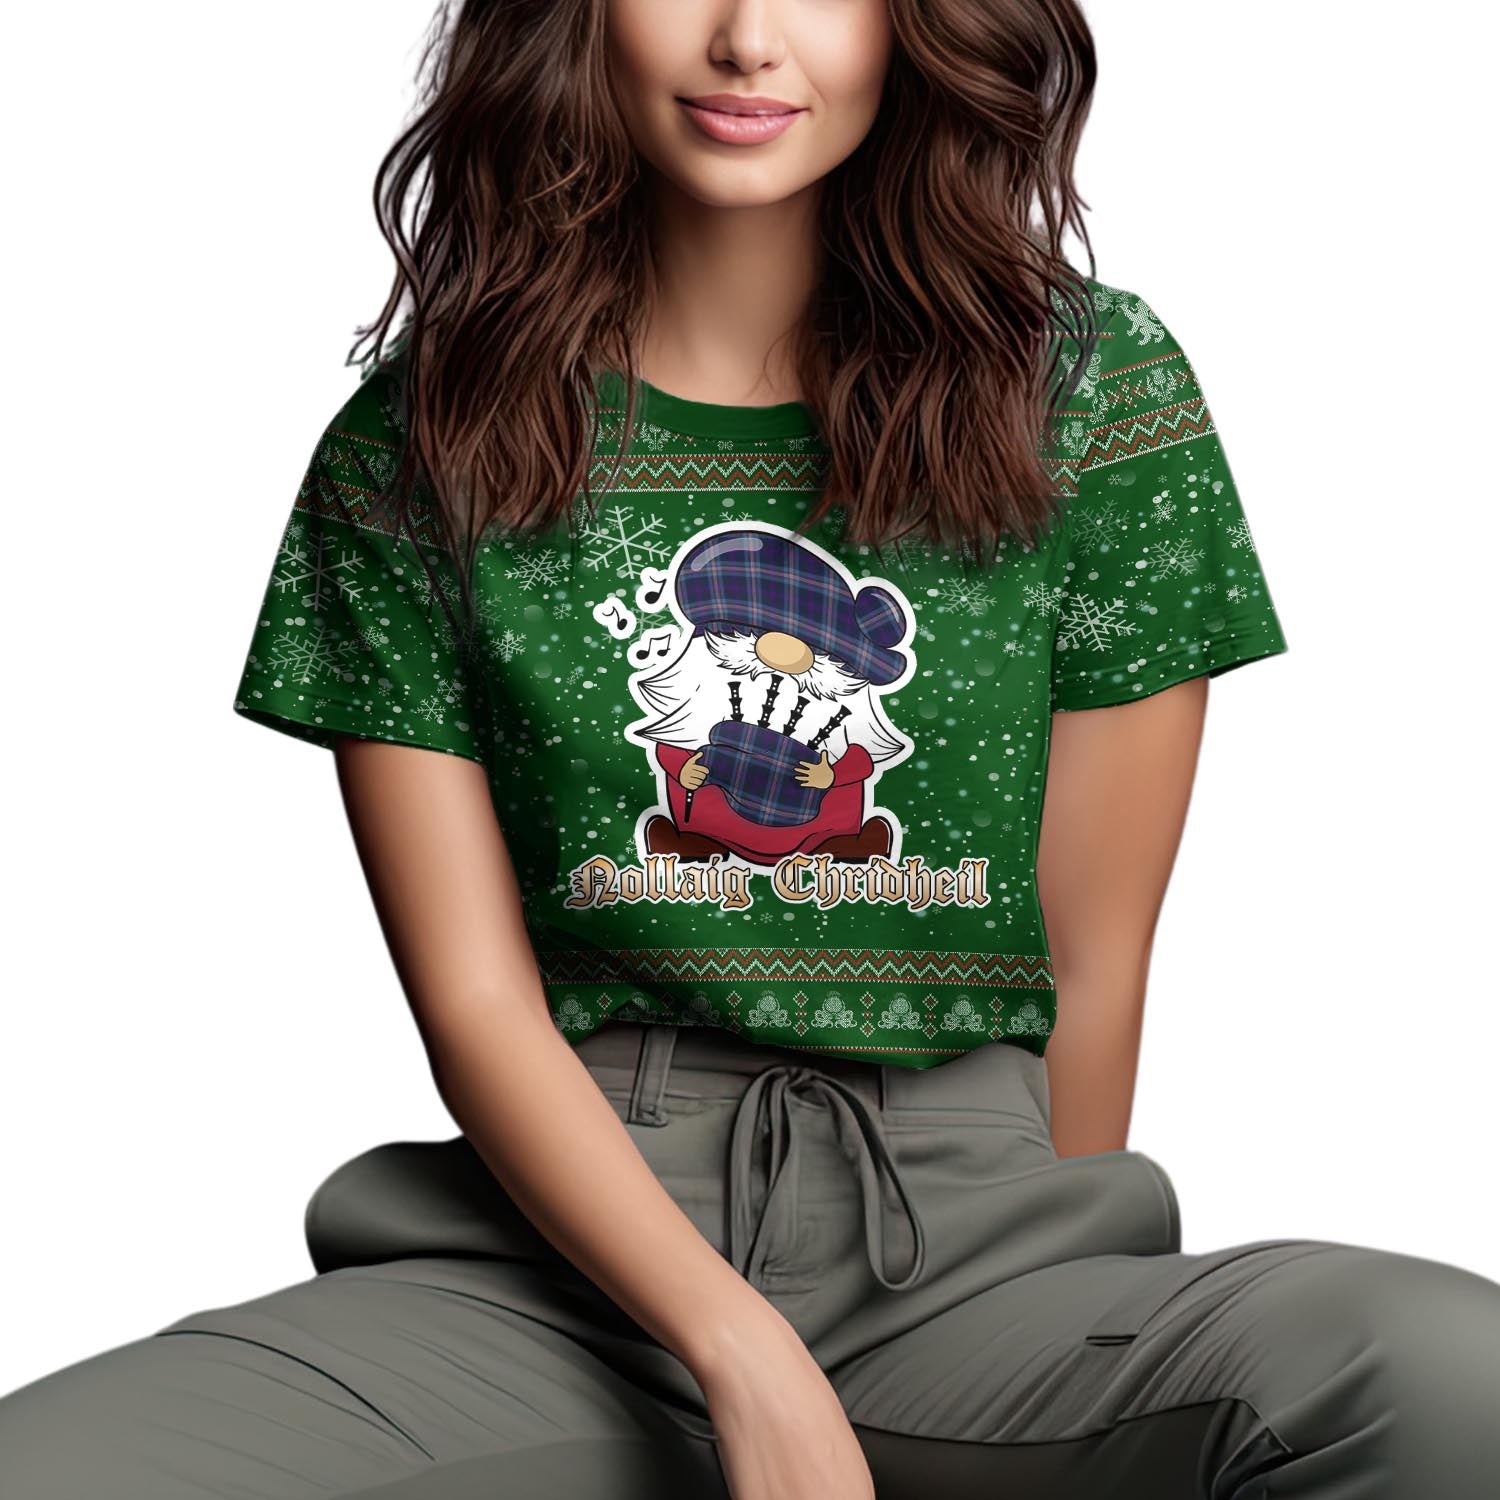 Nevoy Clan Christmas Family T-Shirt with Funny Gnome Playing Bagpipes Women's Shirt Green - Tartanvibesclothing